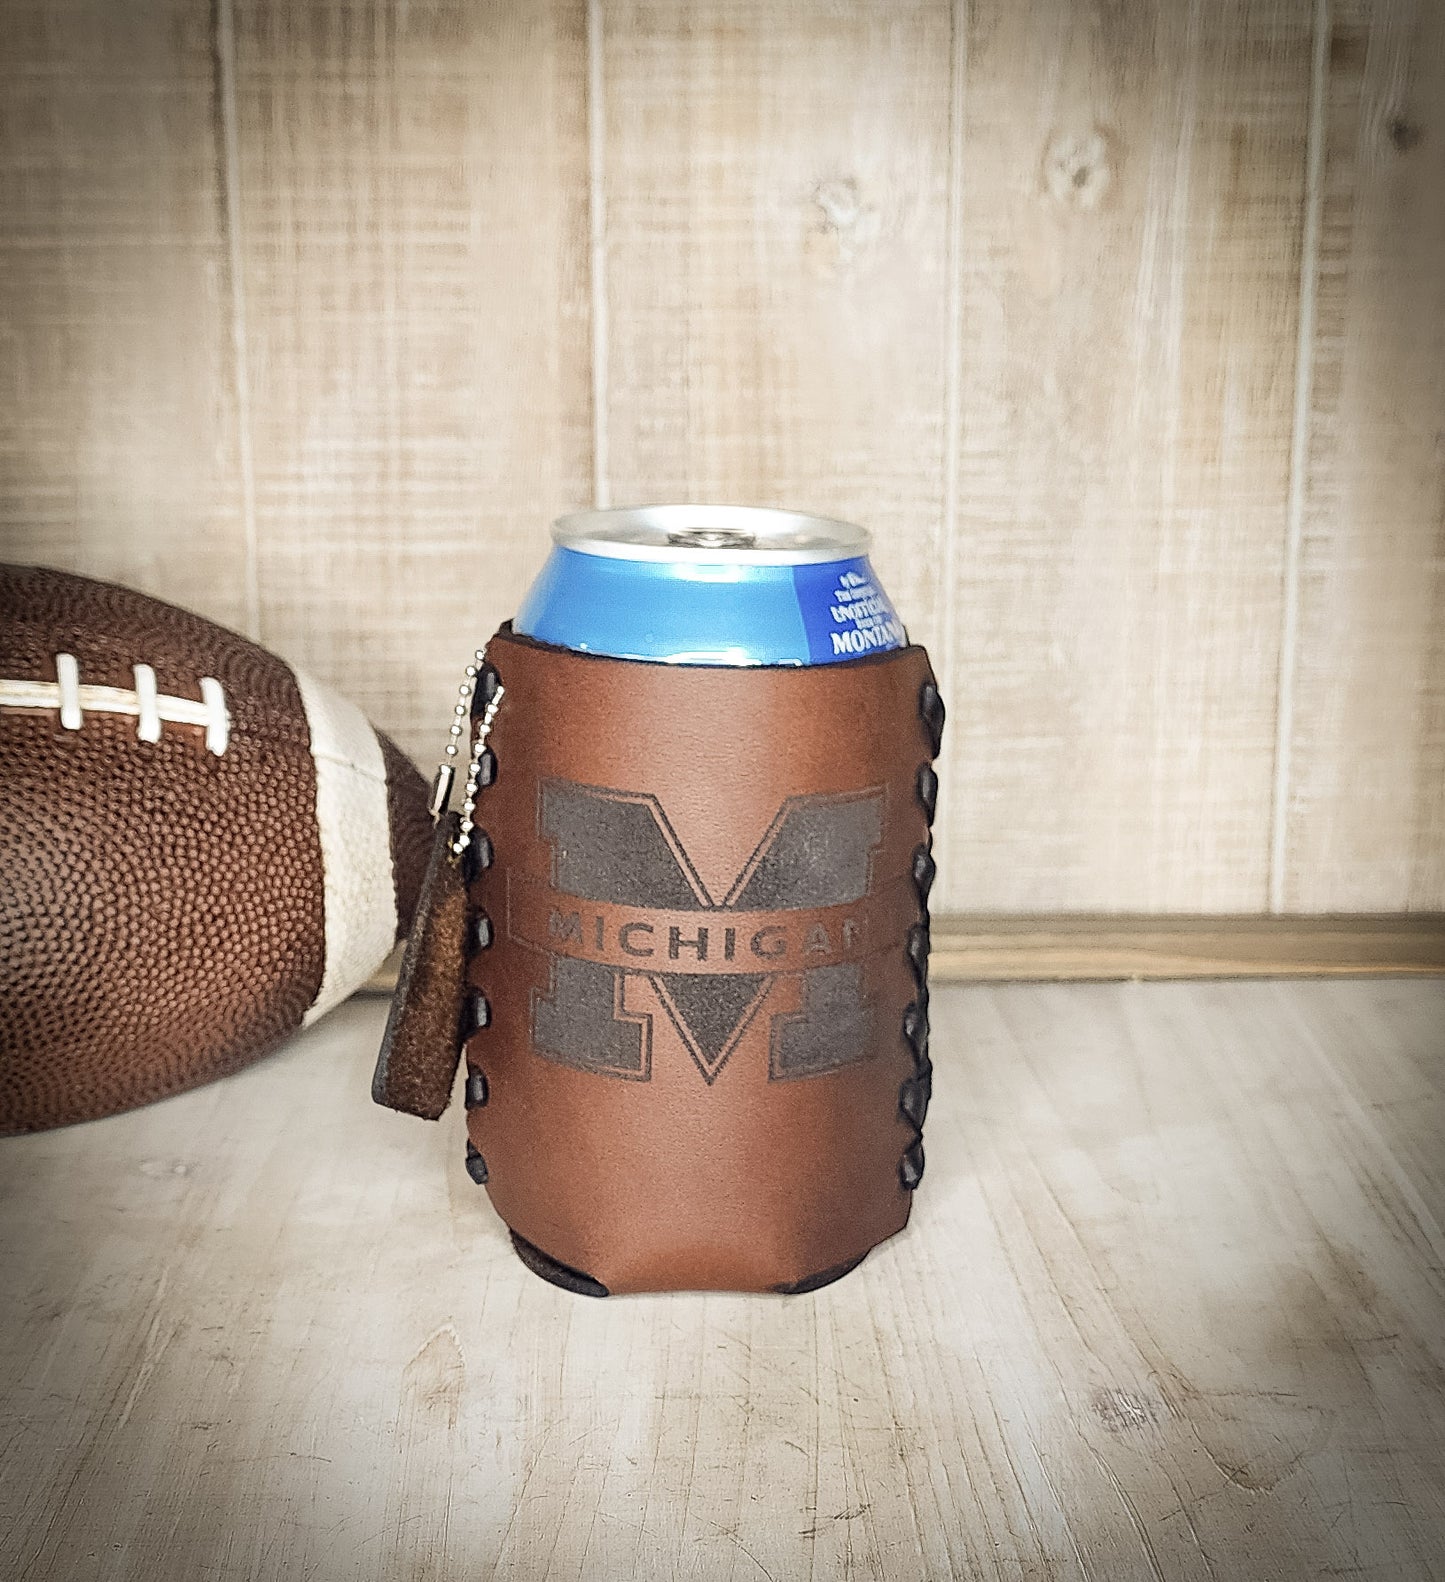 Michigan Wolverines National Championship Leather Can Cozie – Personalized Laser-Engraved Drink Cooler for Football Fans